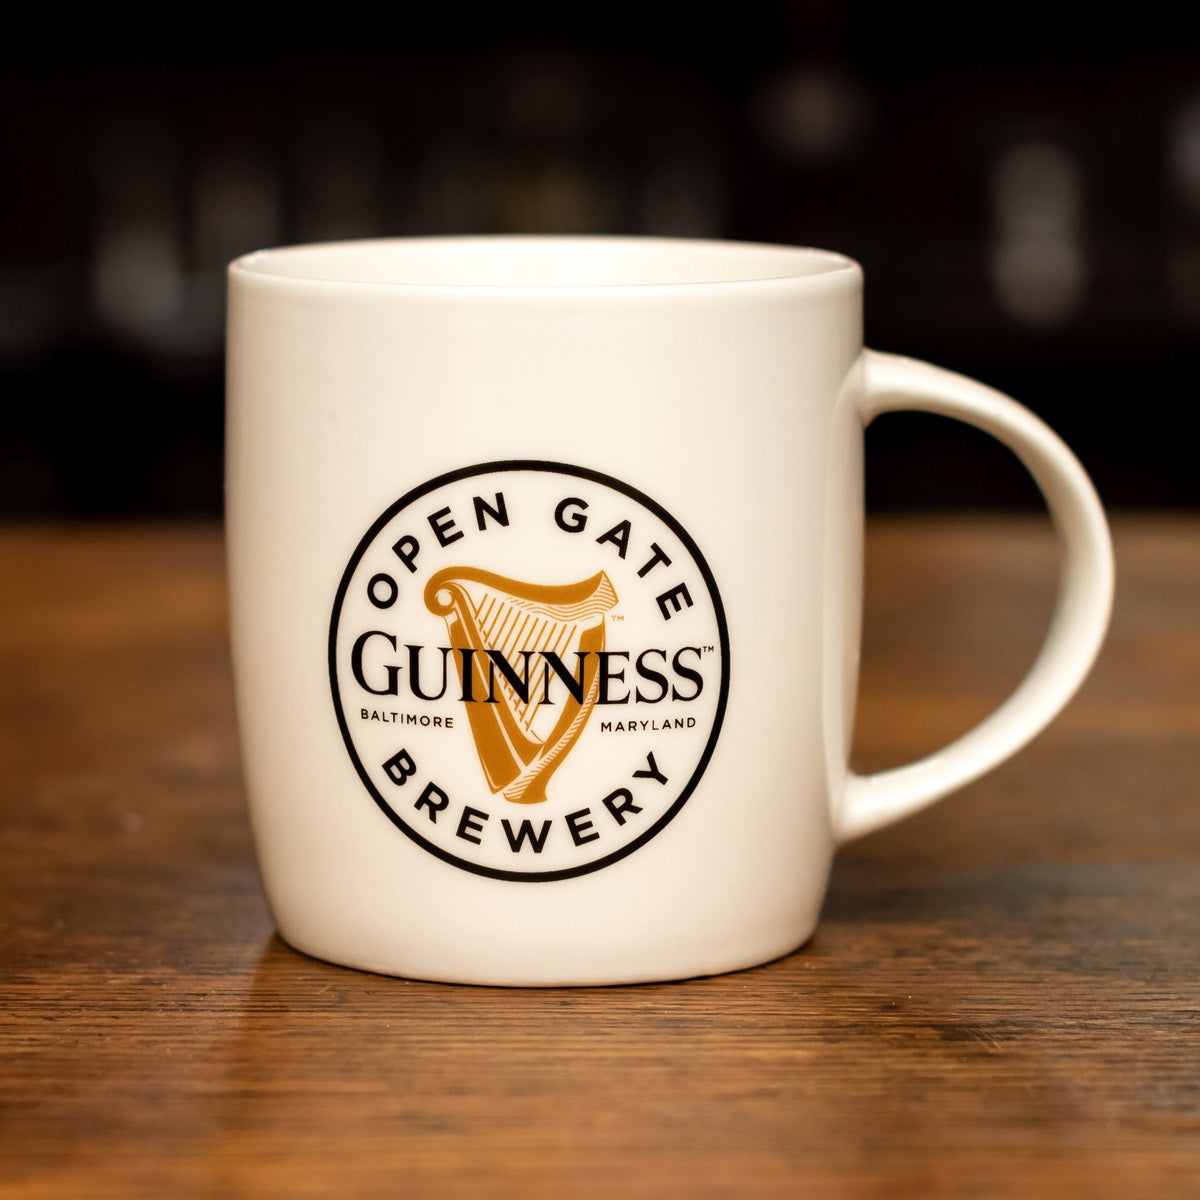 Get your hands on the Guinness Open Gate Brewery White Ceramic Mug from Guinness.